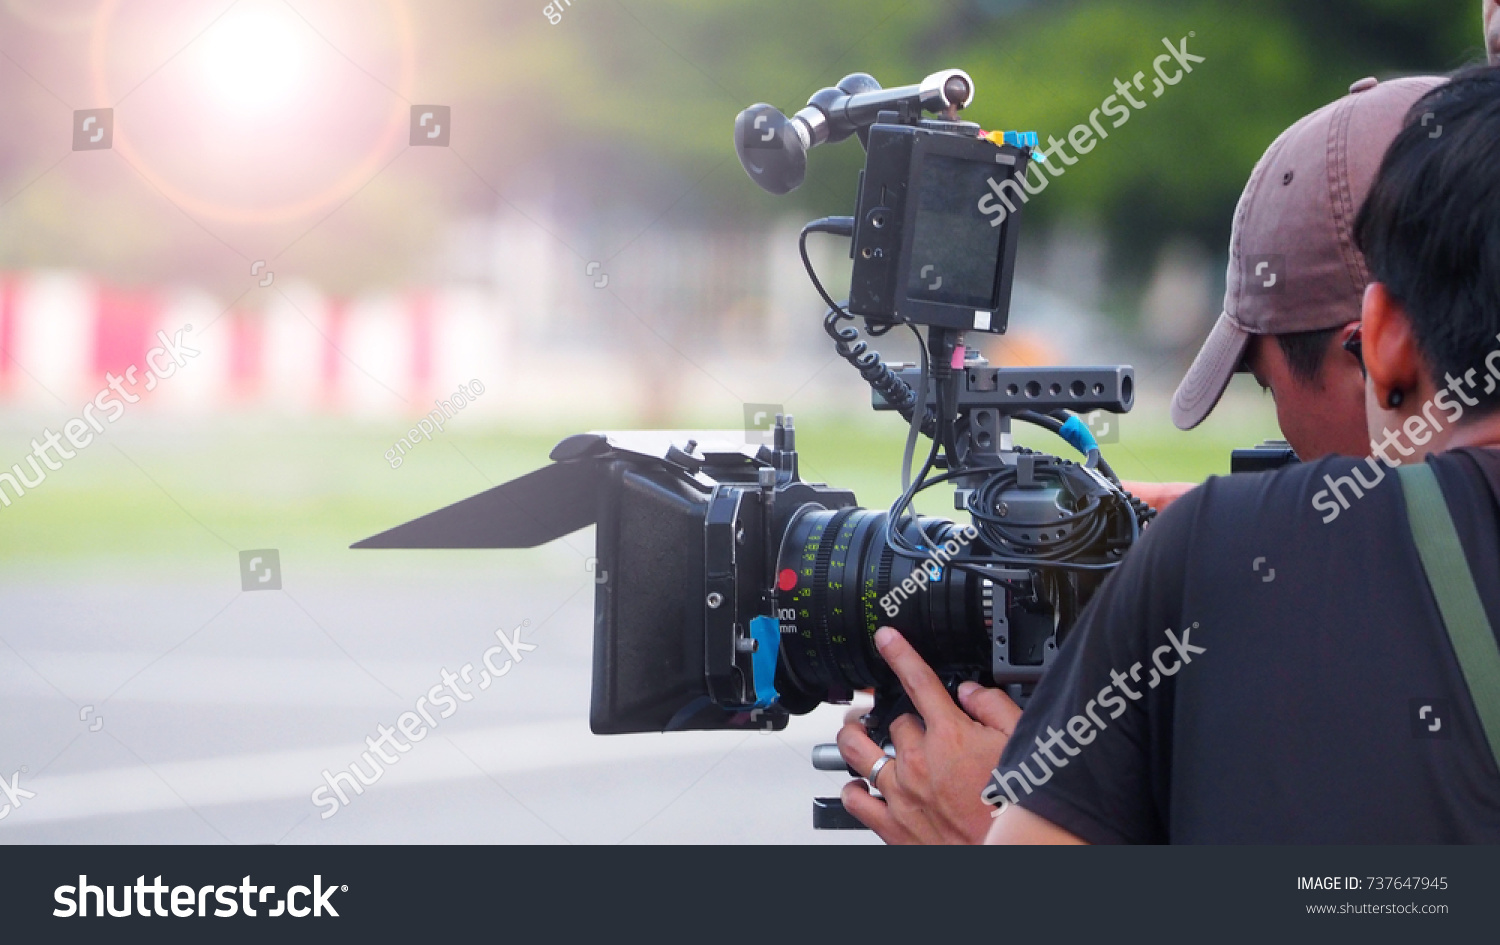 Blurry image of movie shooting or video production and film crew team with camera equipment at outdoor location and light flare effect.  #737647945